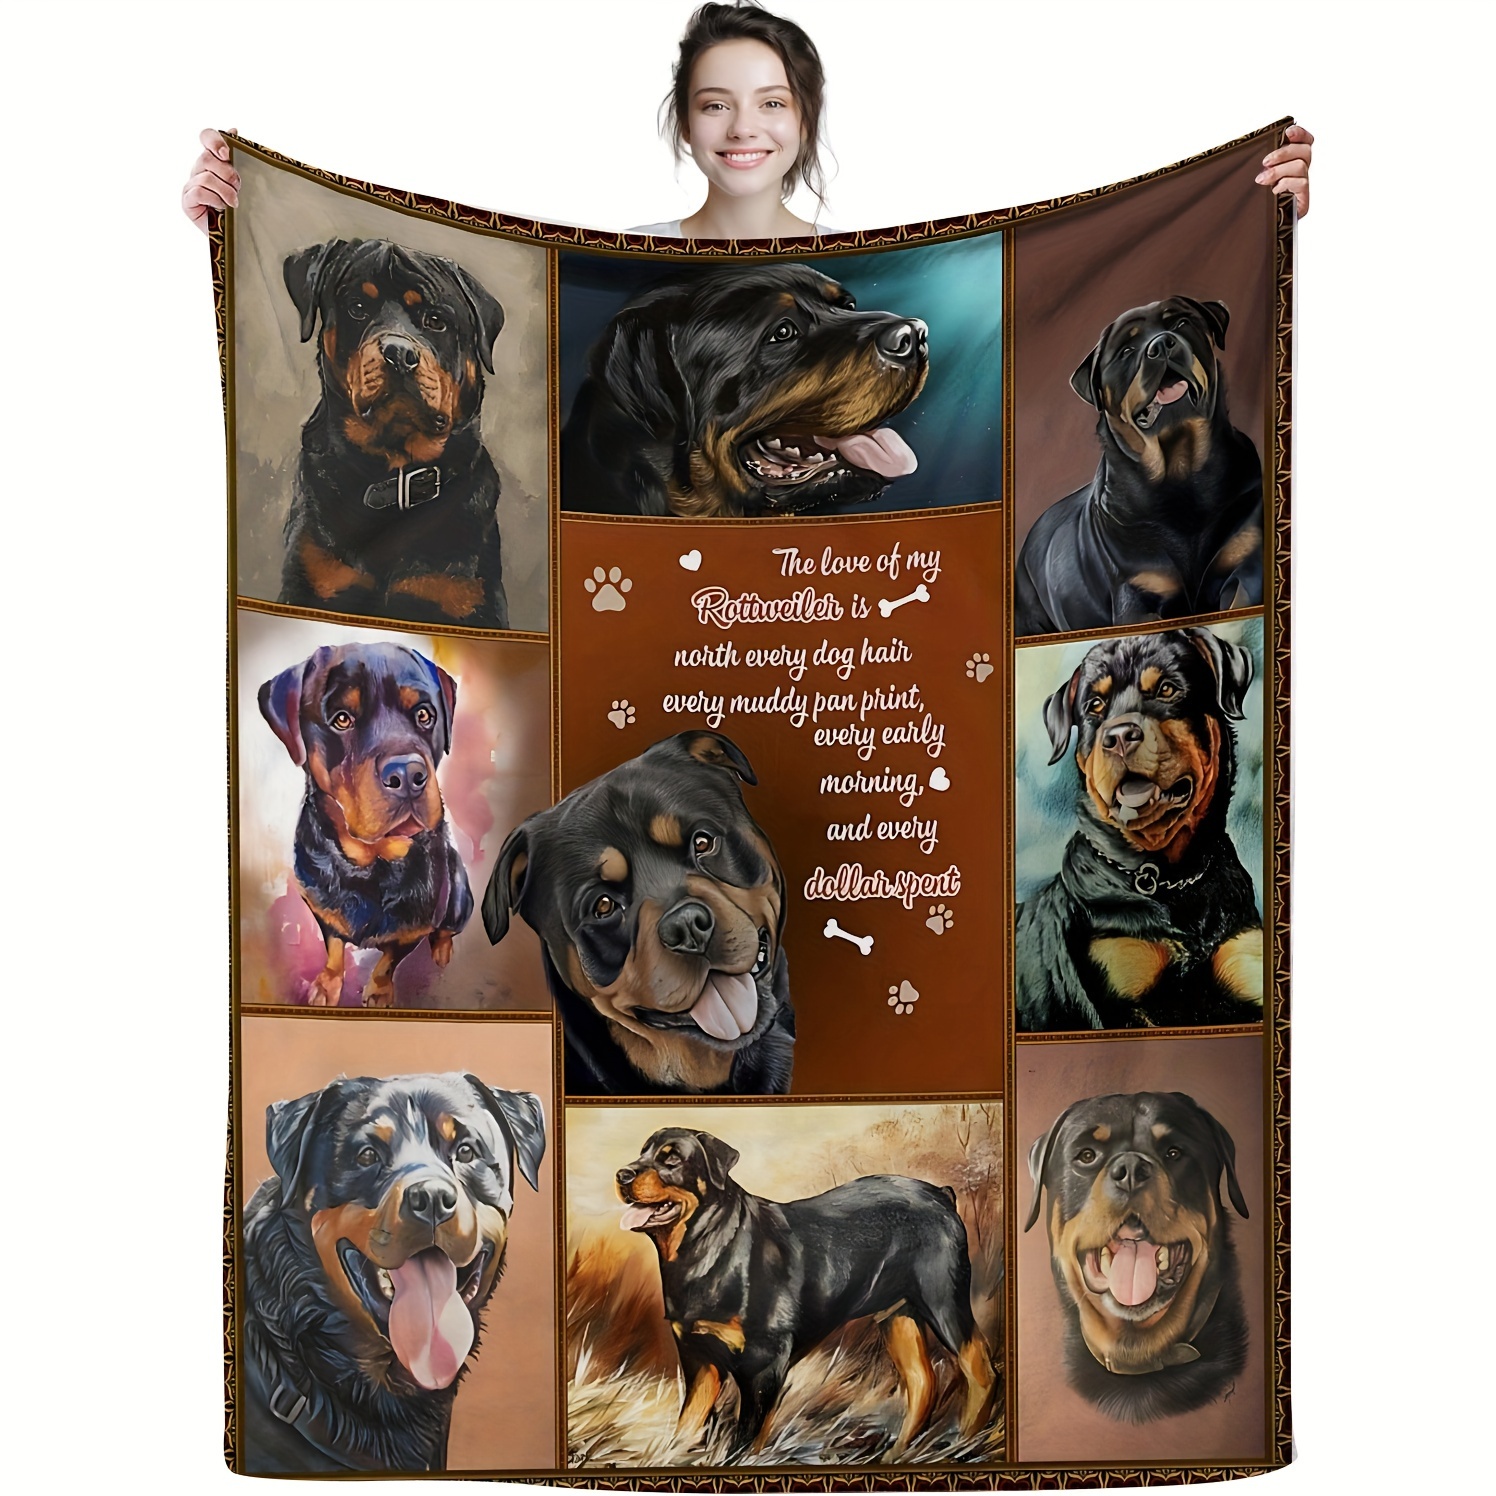 

Themed Soft Fleece Throw Blanket, Style Animal Pattern Flannel, All Seasons Knitted Polyester Blanket, Cozy Pet Lover Gift With Special Embellishments